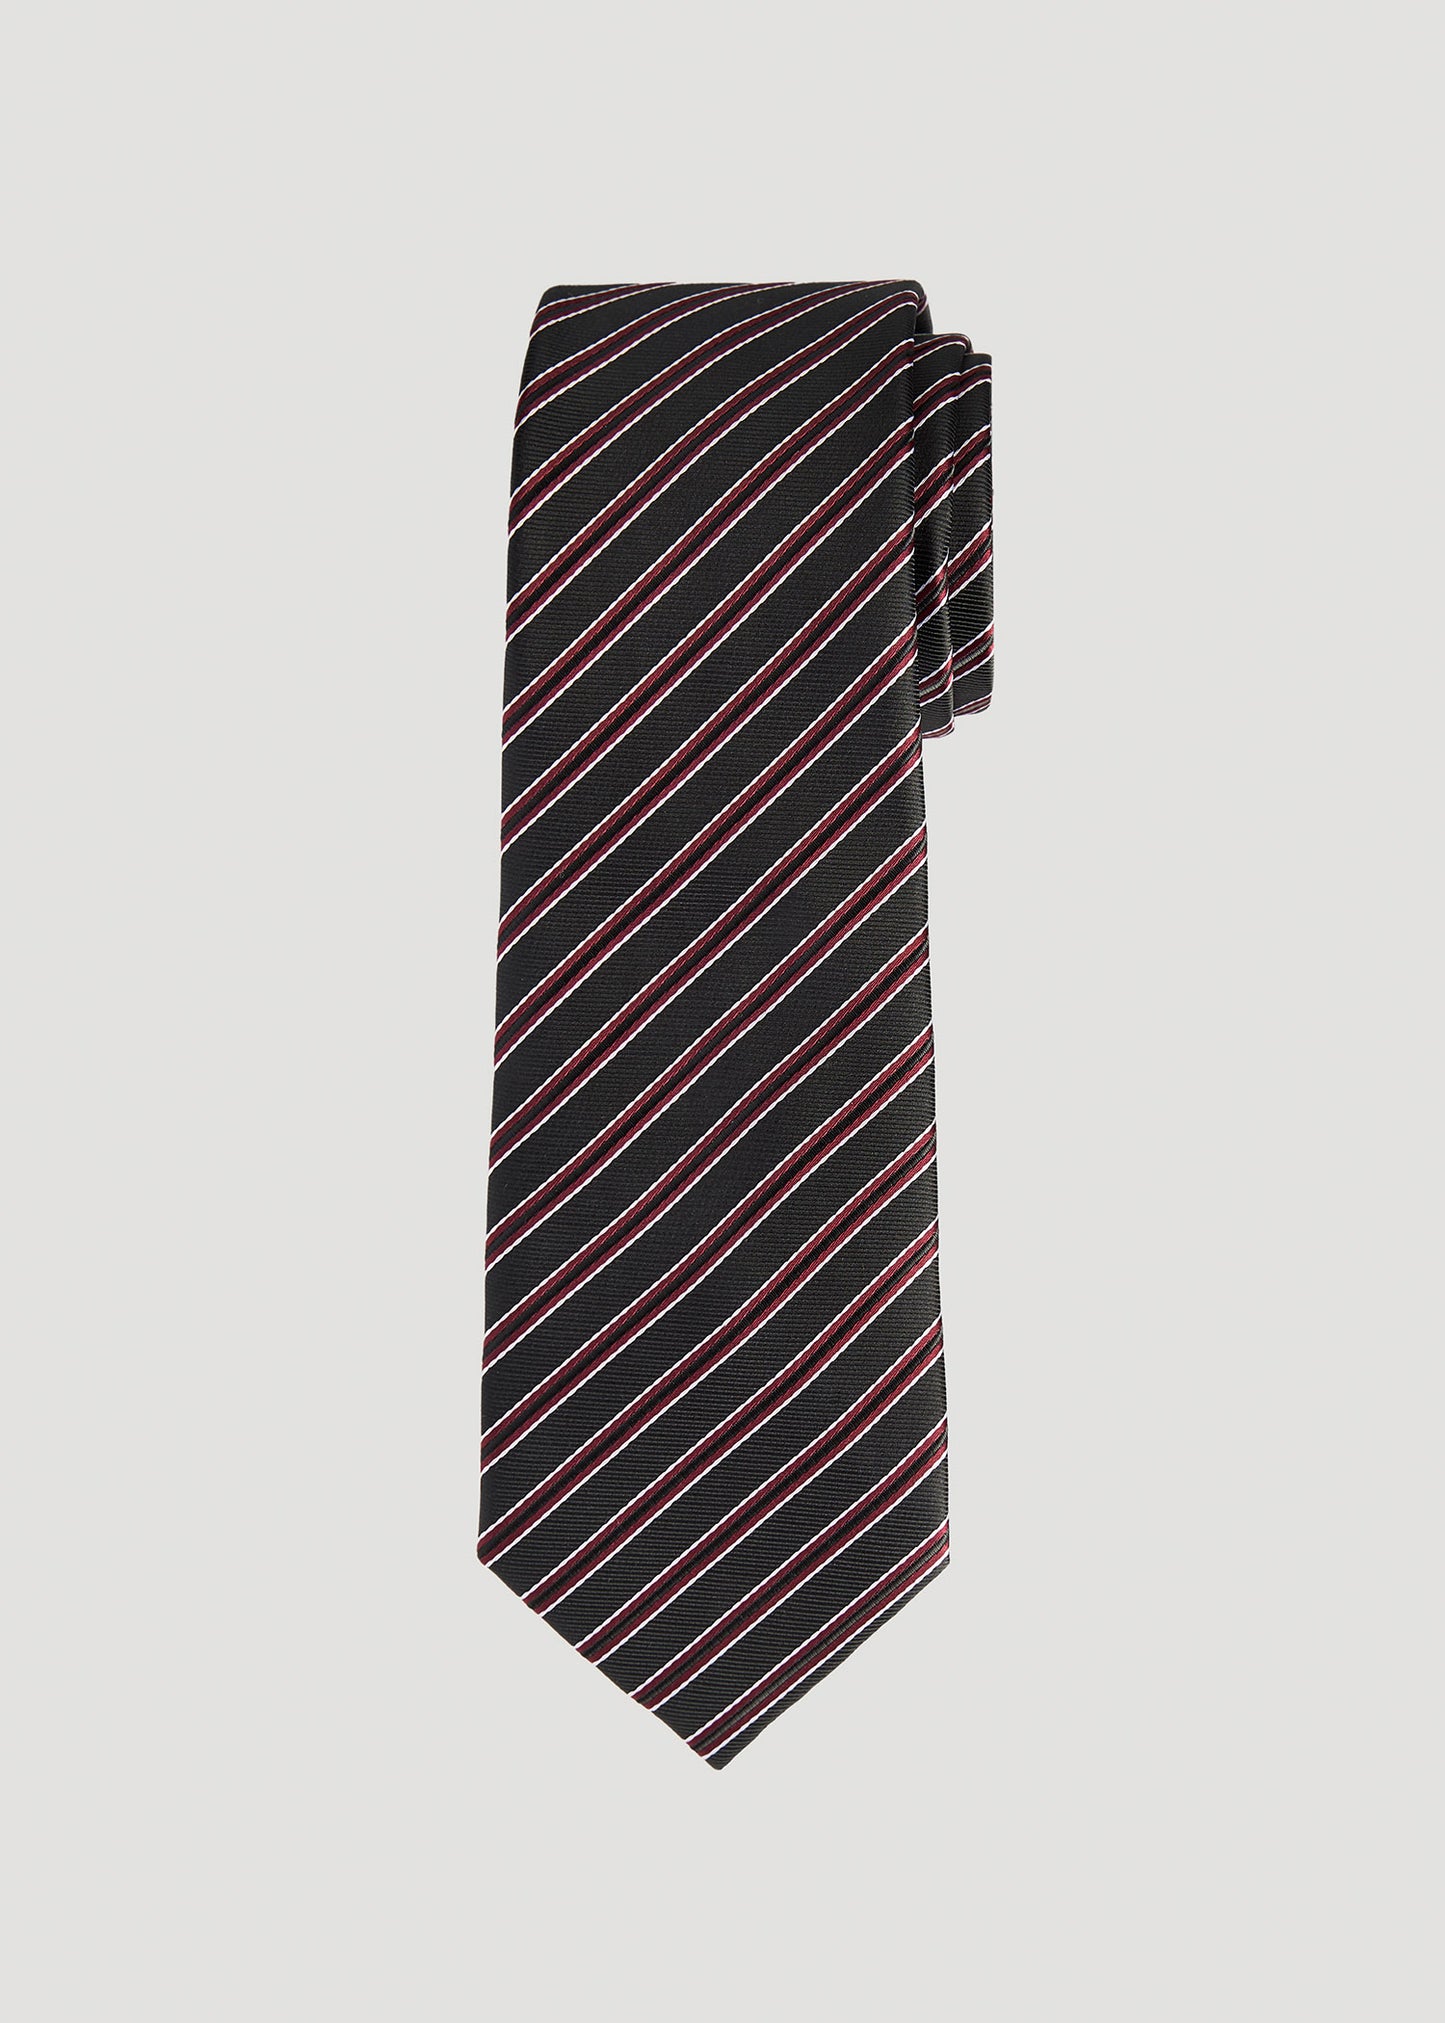 Dress Ties for Tall Men in Burgundy Stripe by American Tall